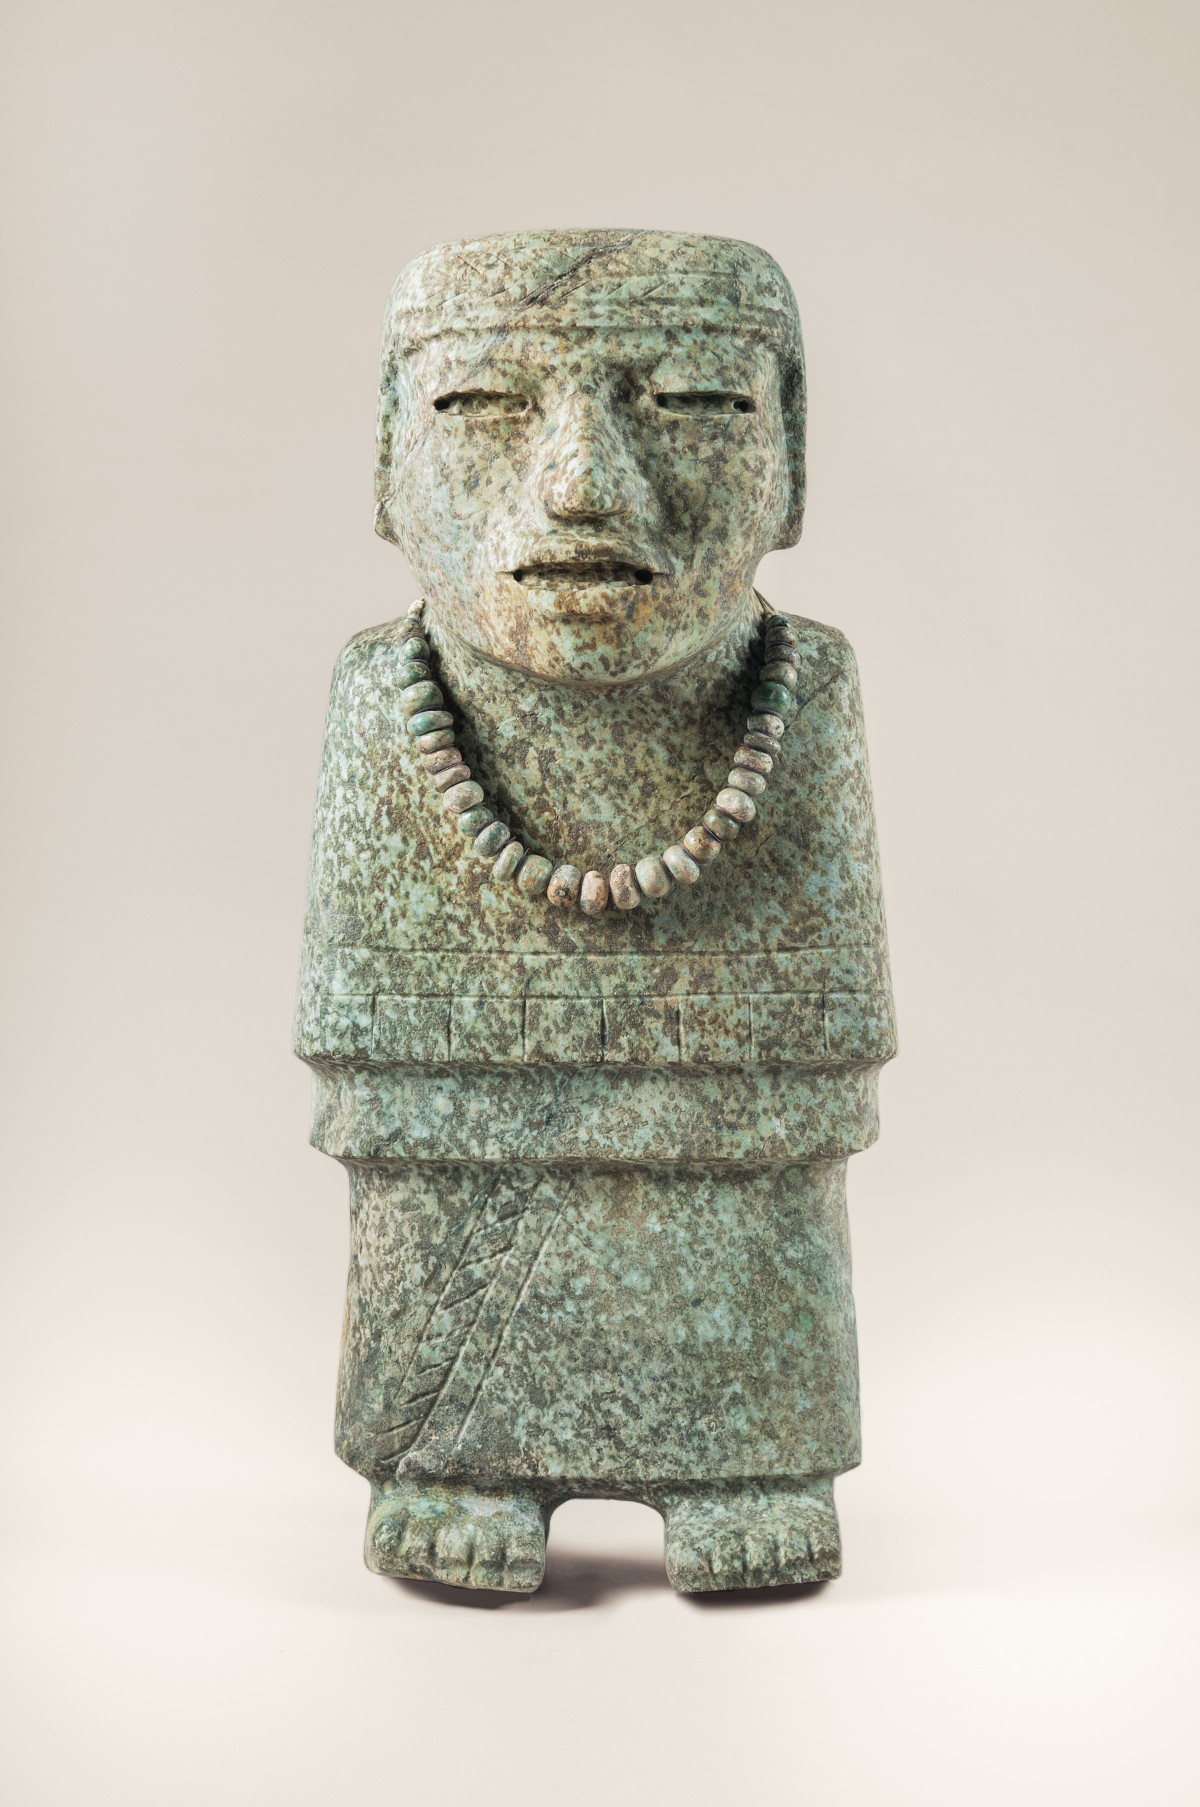 Image: Standing Figure, Tlalocan [tunnel under Feathered Serpent Pyramid], Teotihuacan, Mexico, 200–250